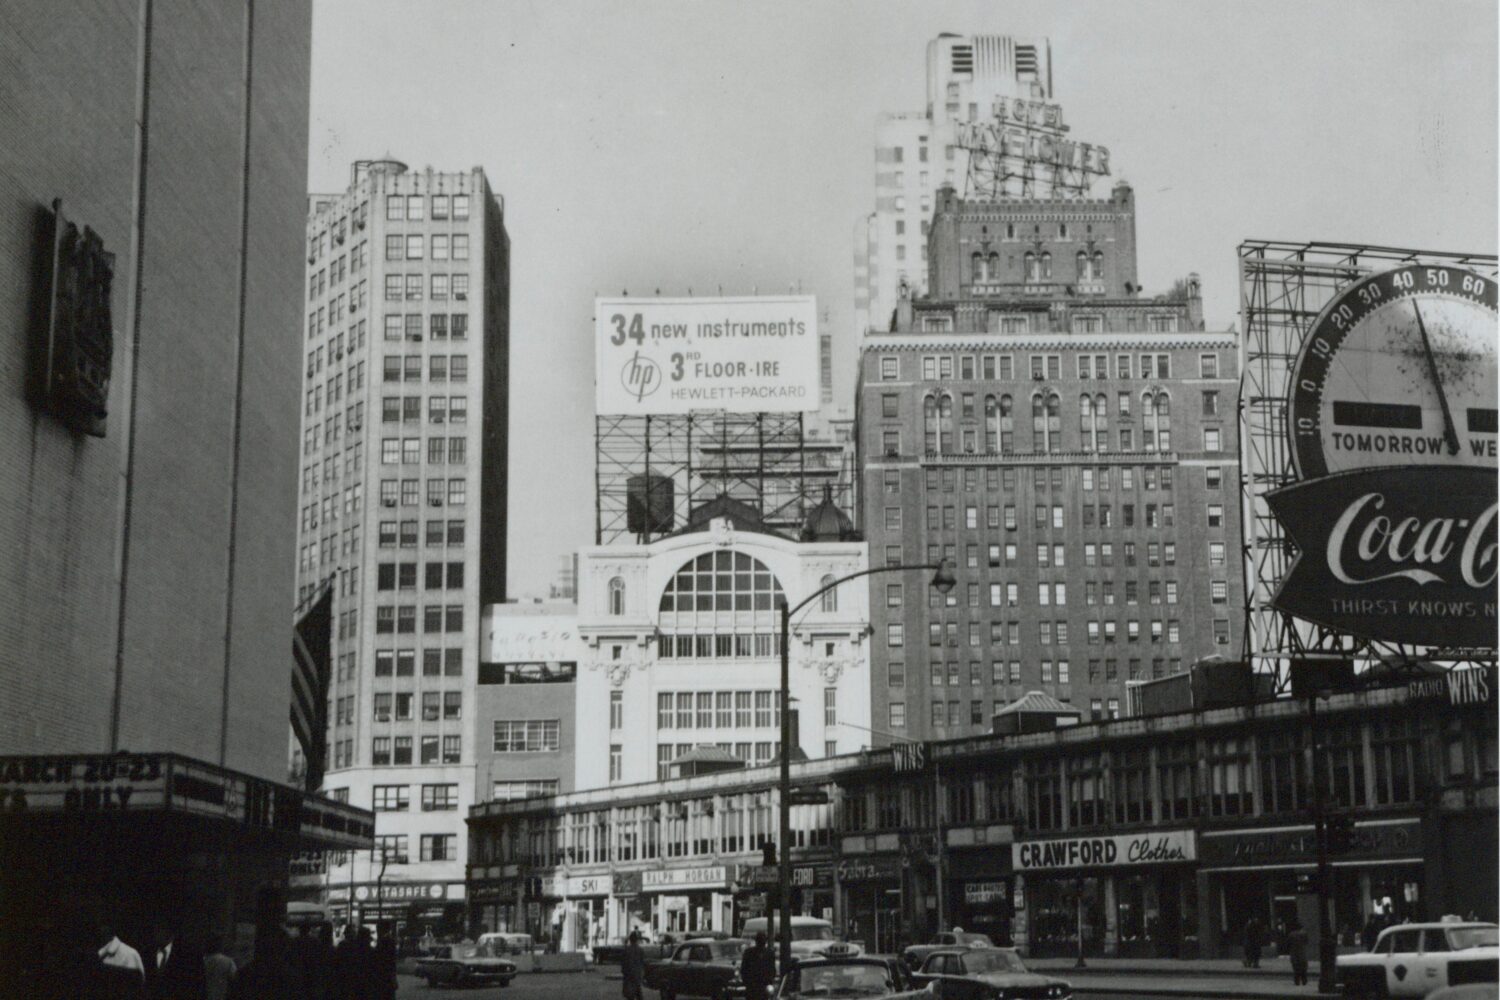 Photo of a billboard indicating 34 new instruments featured by HP on 3rd floor of the IRE in 1957.